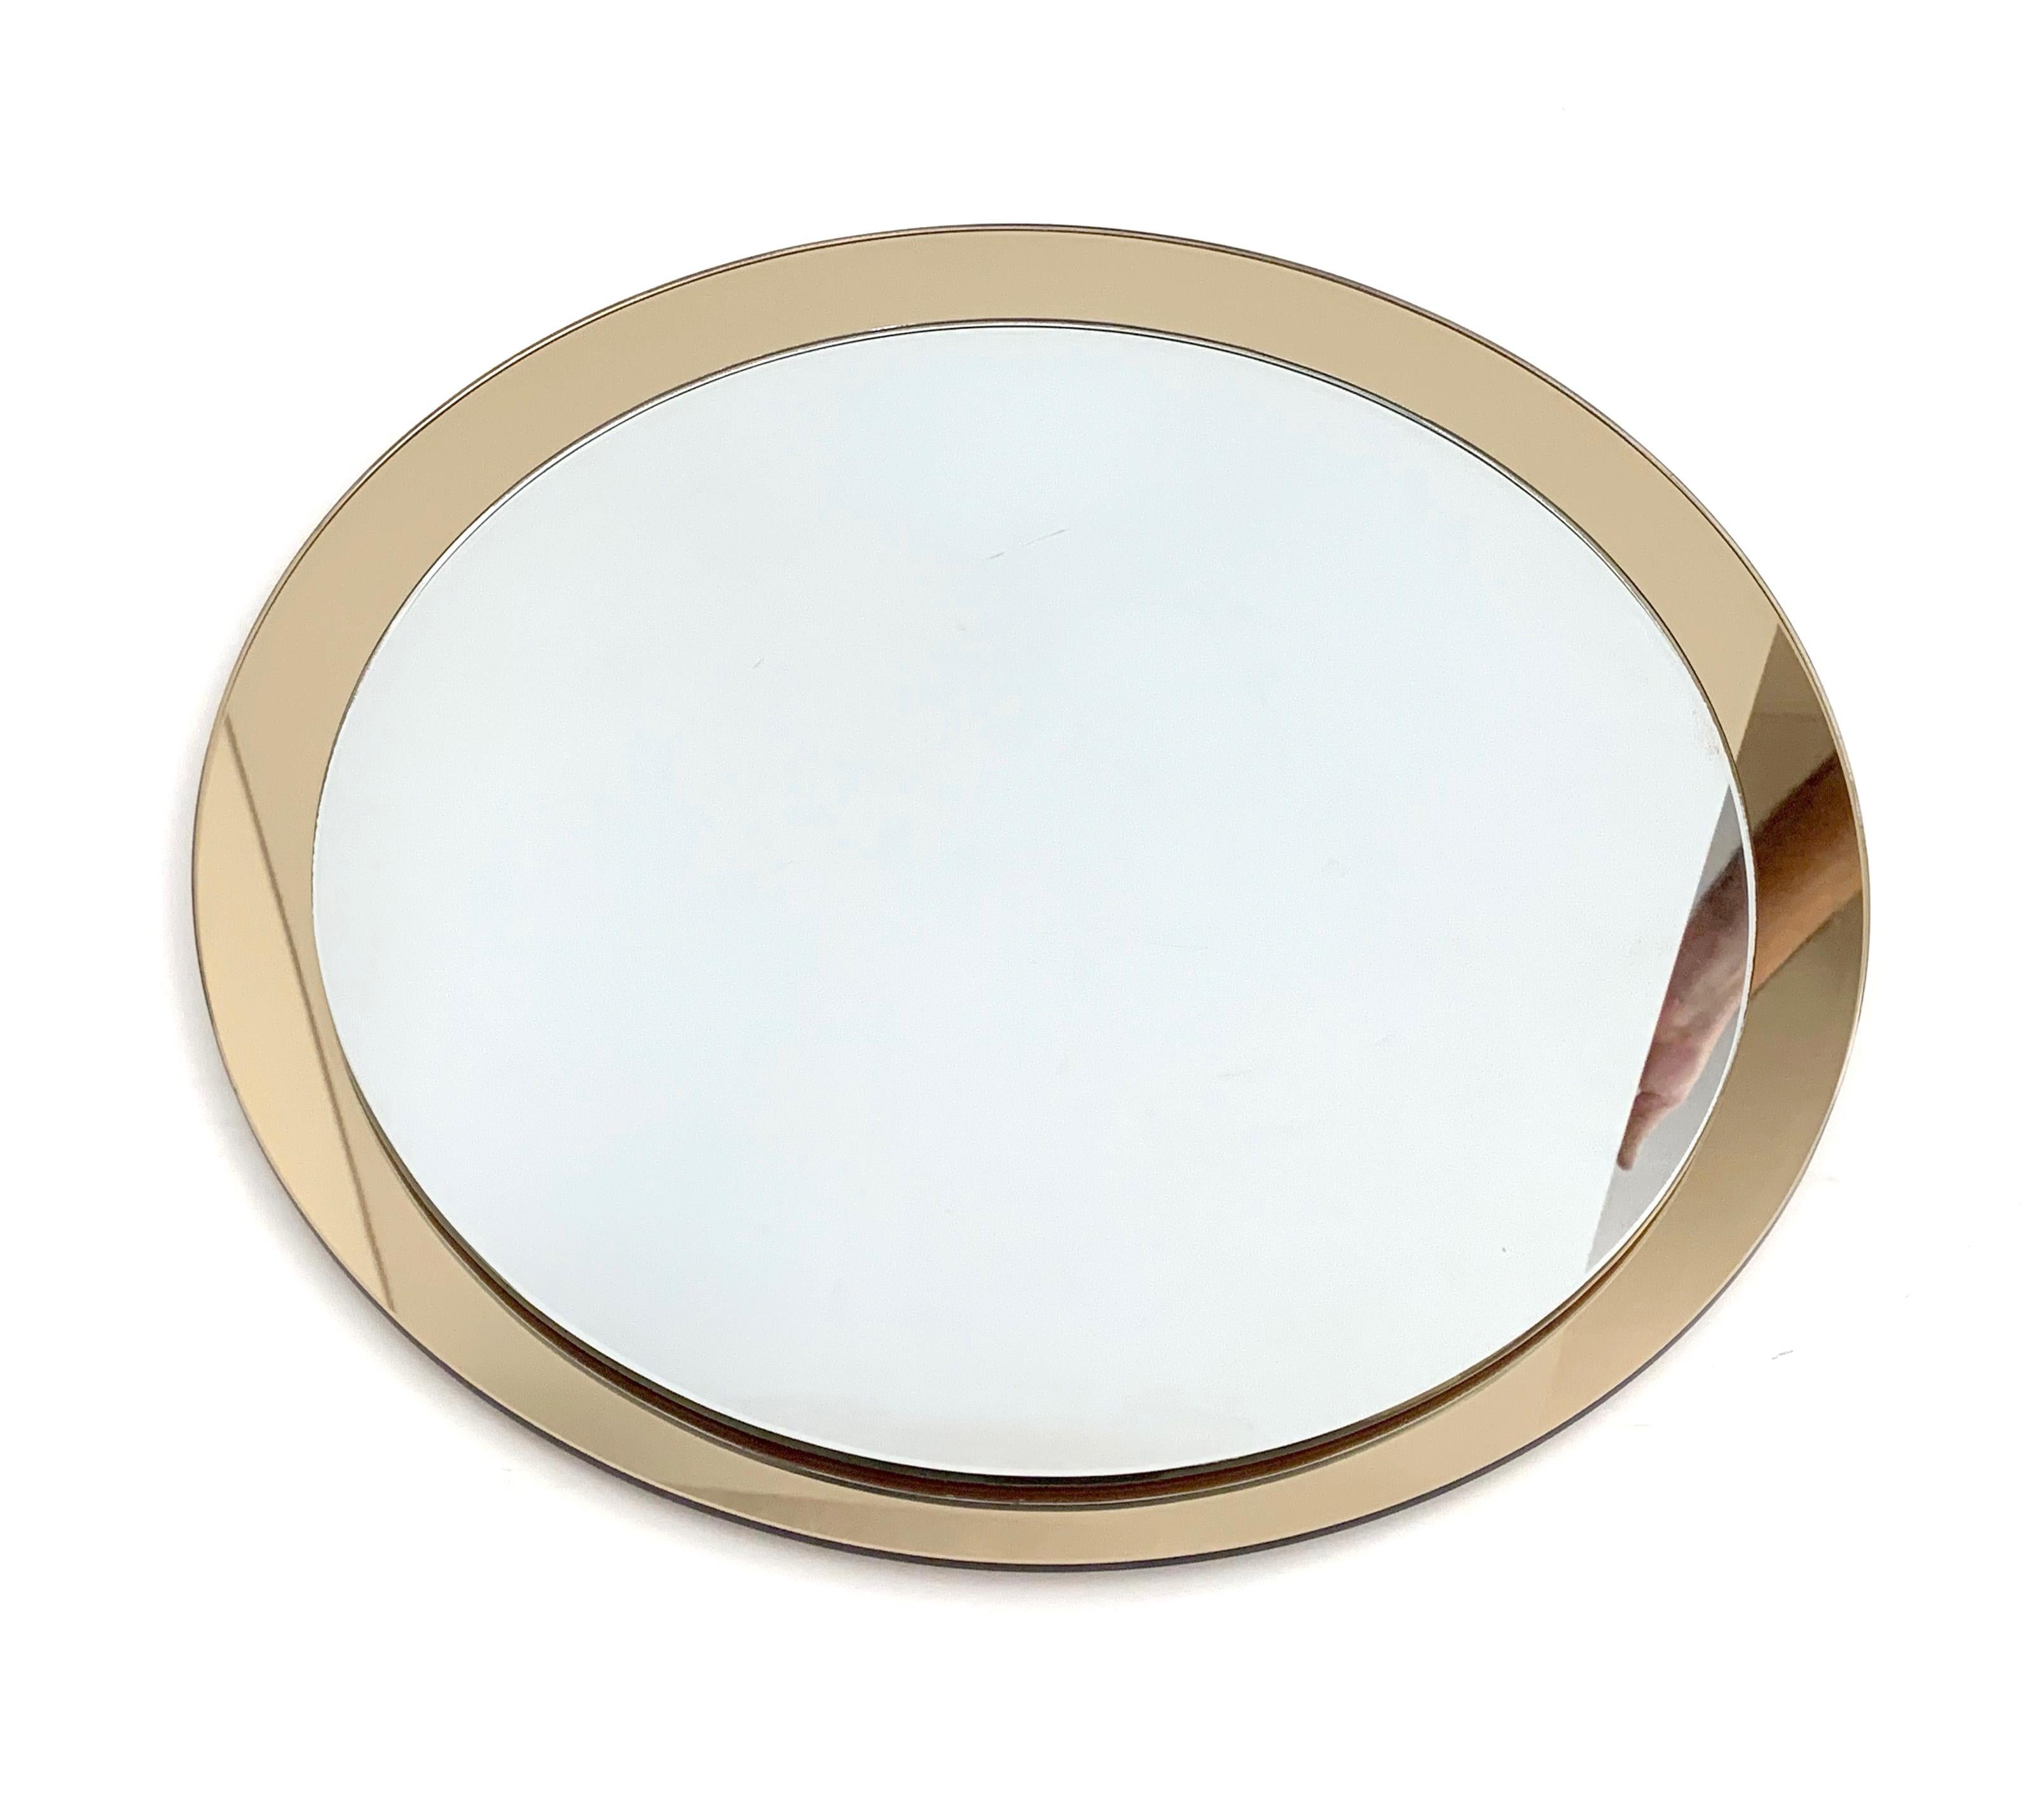 Galimberti Midcentury Italian Round Mirror with Double Brassed Gold Frame, 1975 For Sale 4